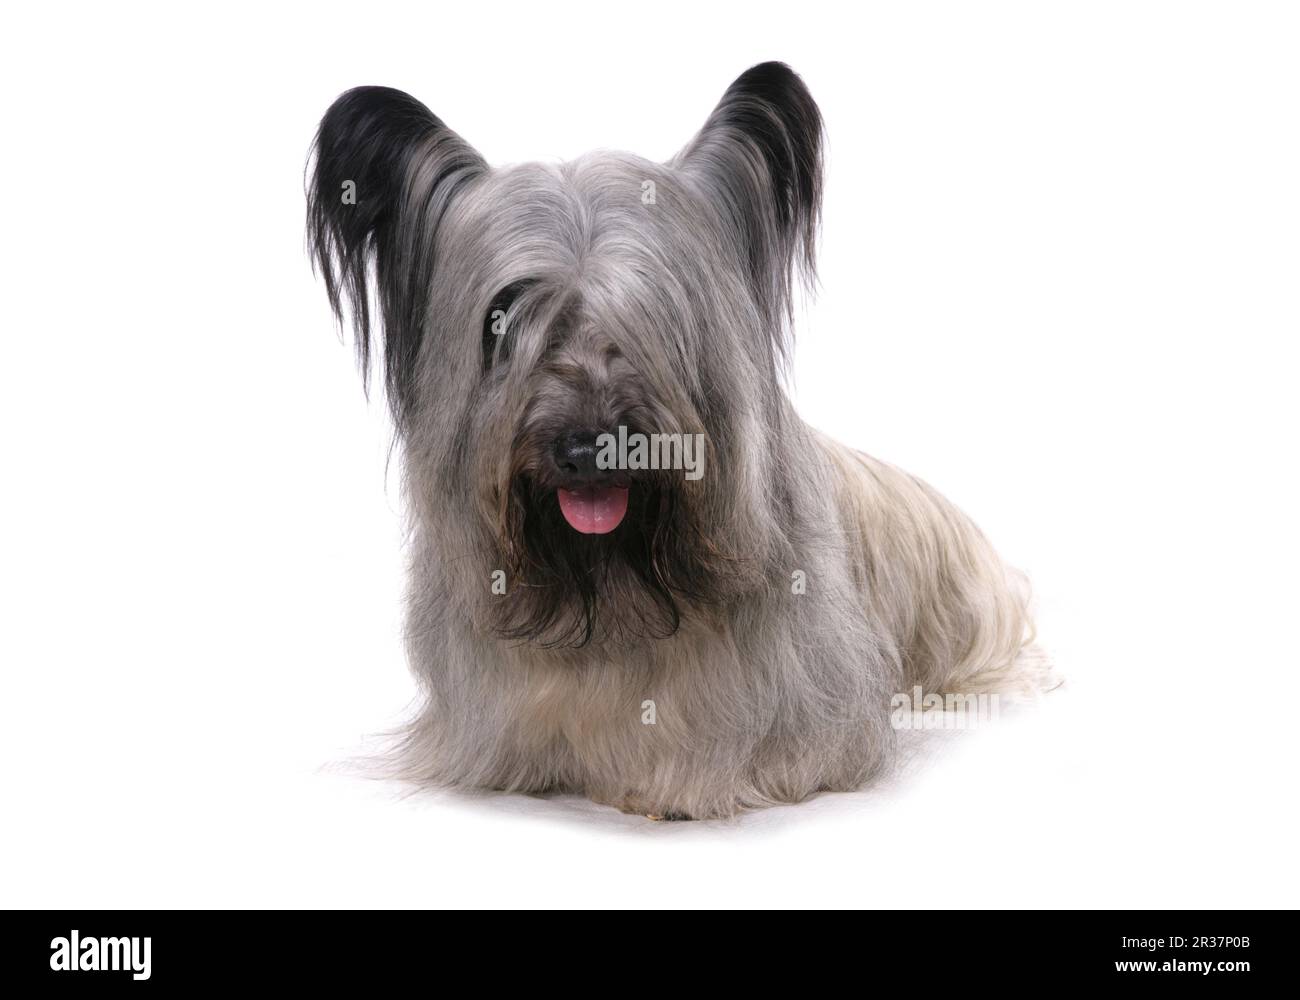 Domestic Dog, Skye Terrier, Adult Male, Sitting Stock Photo